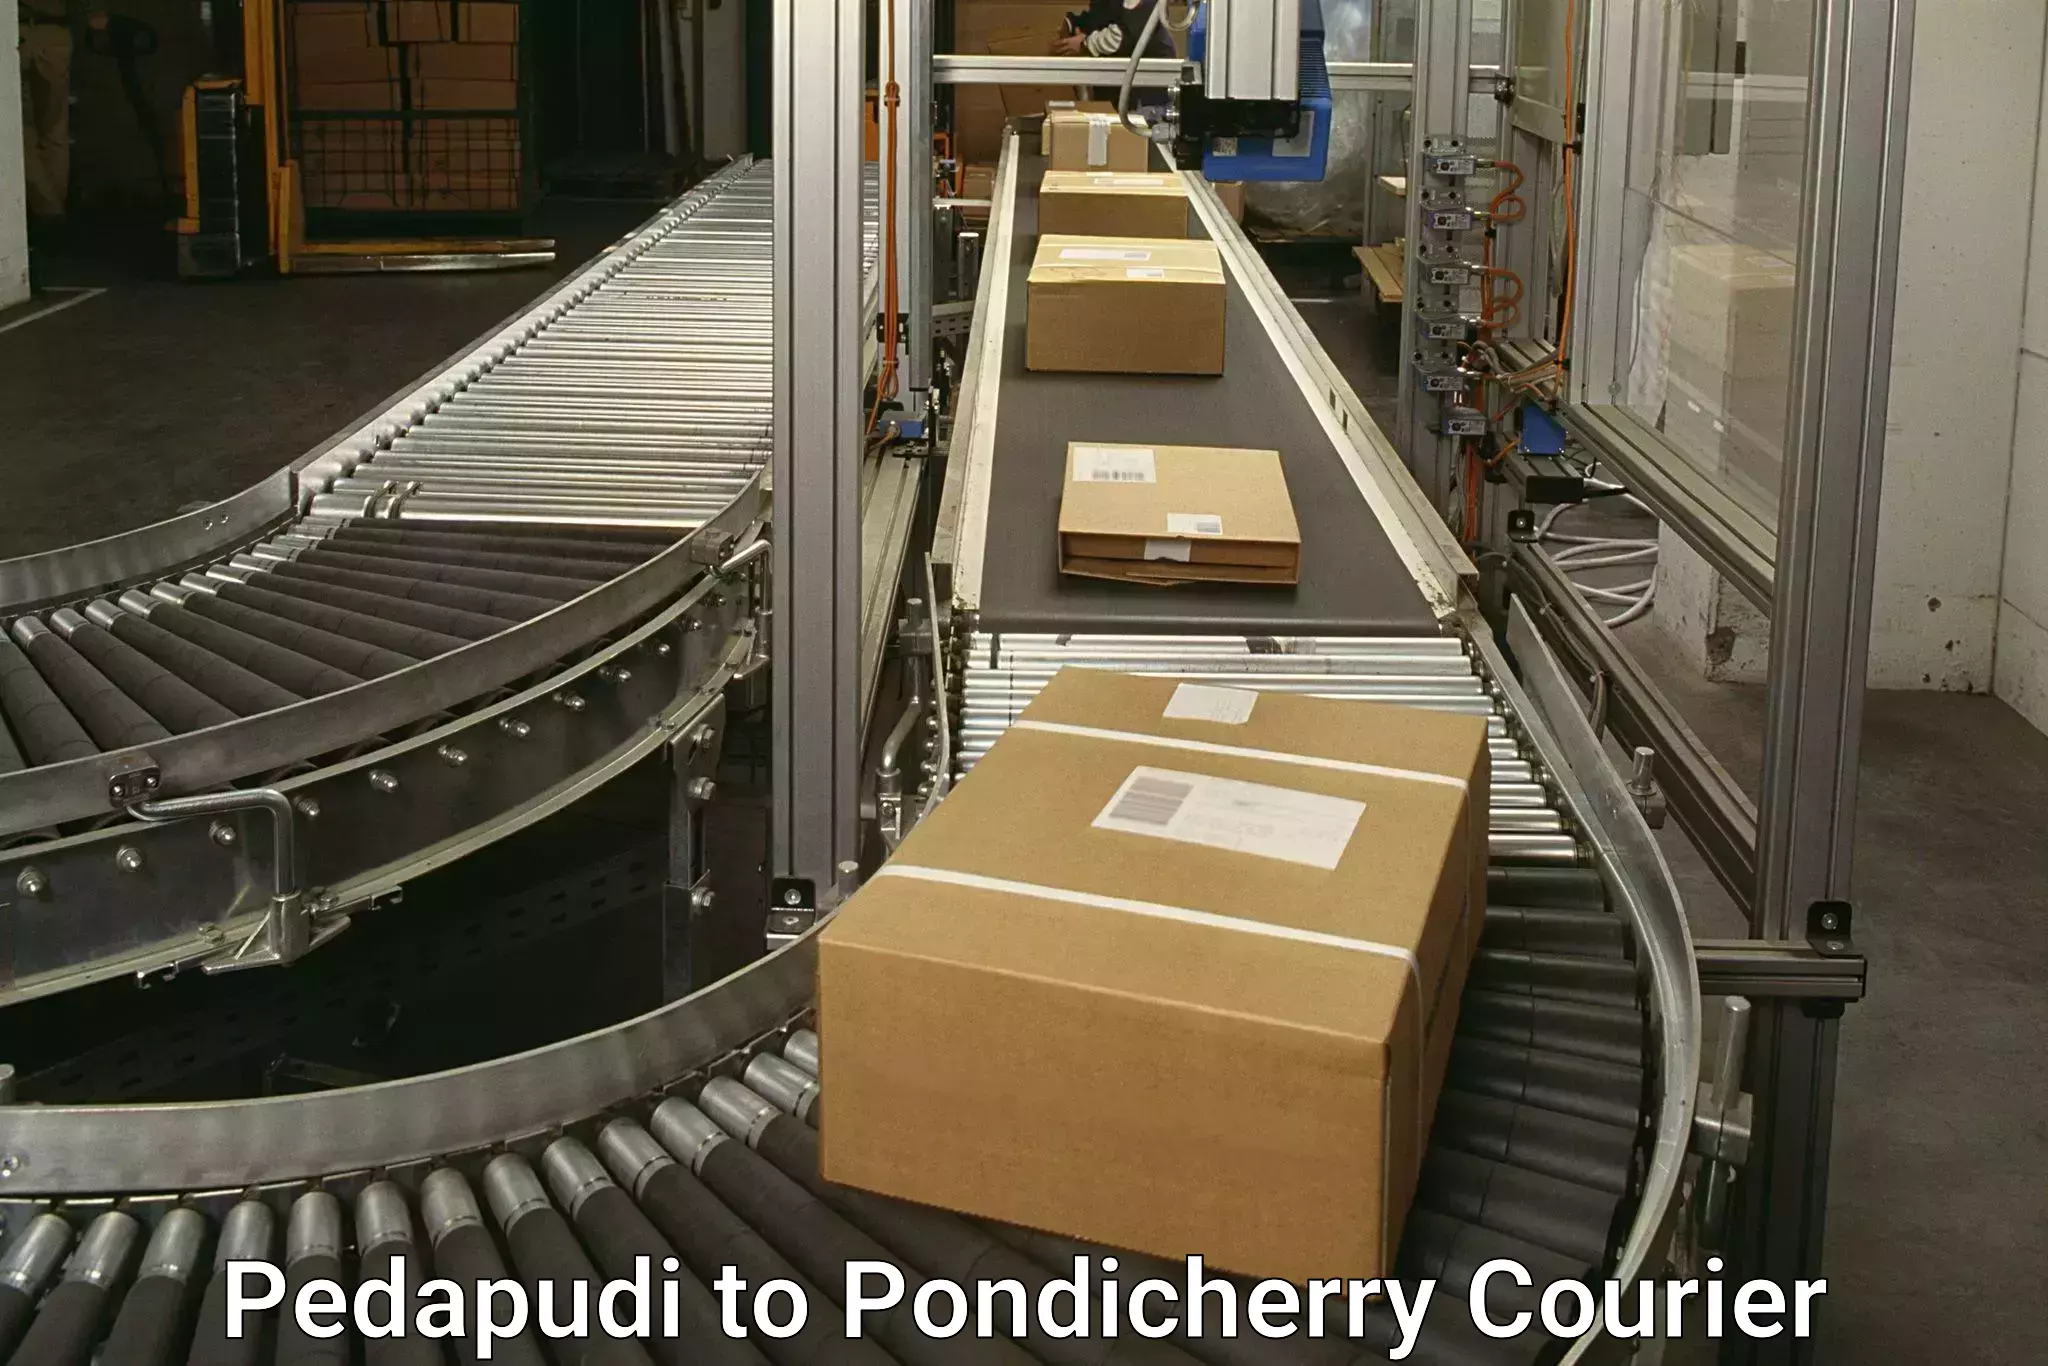 Weekend courier service Pedapudi to Pondicherry